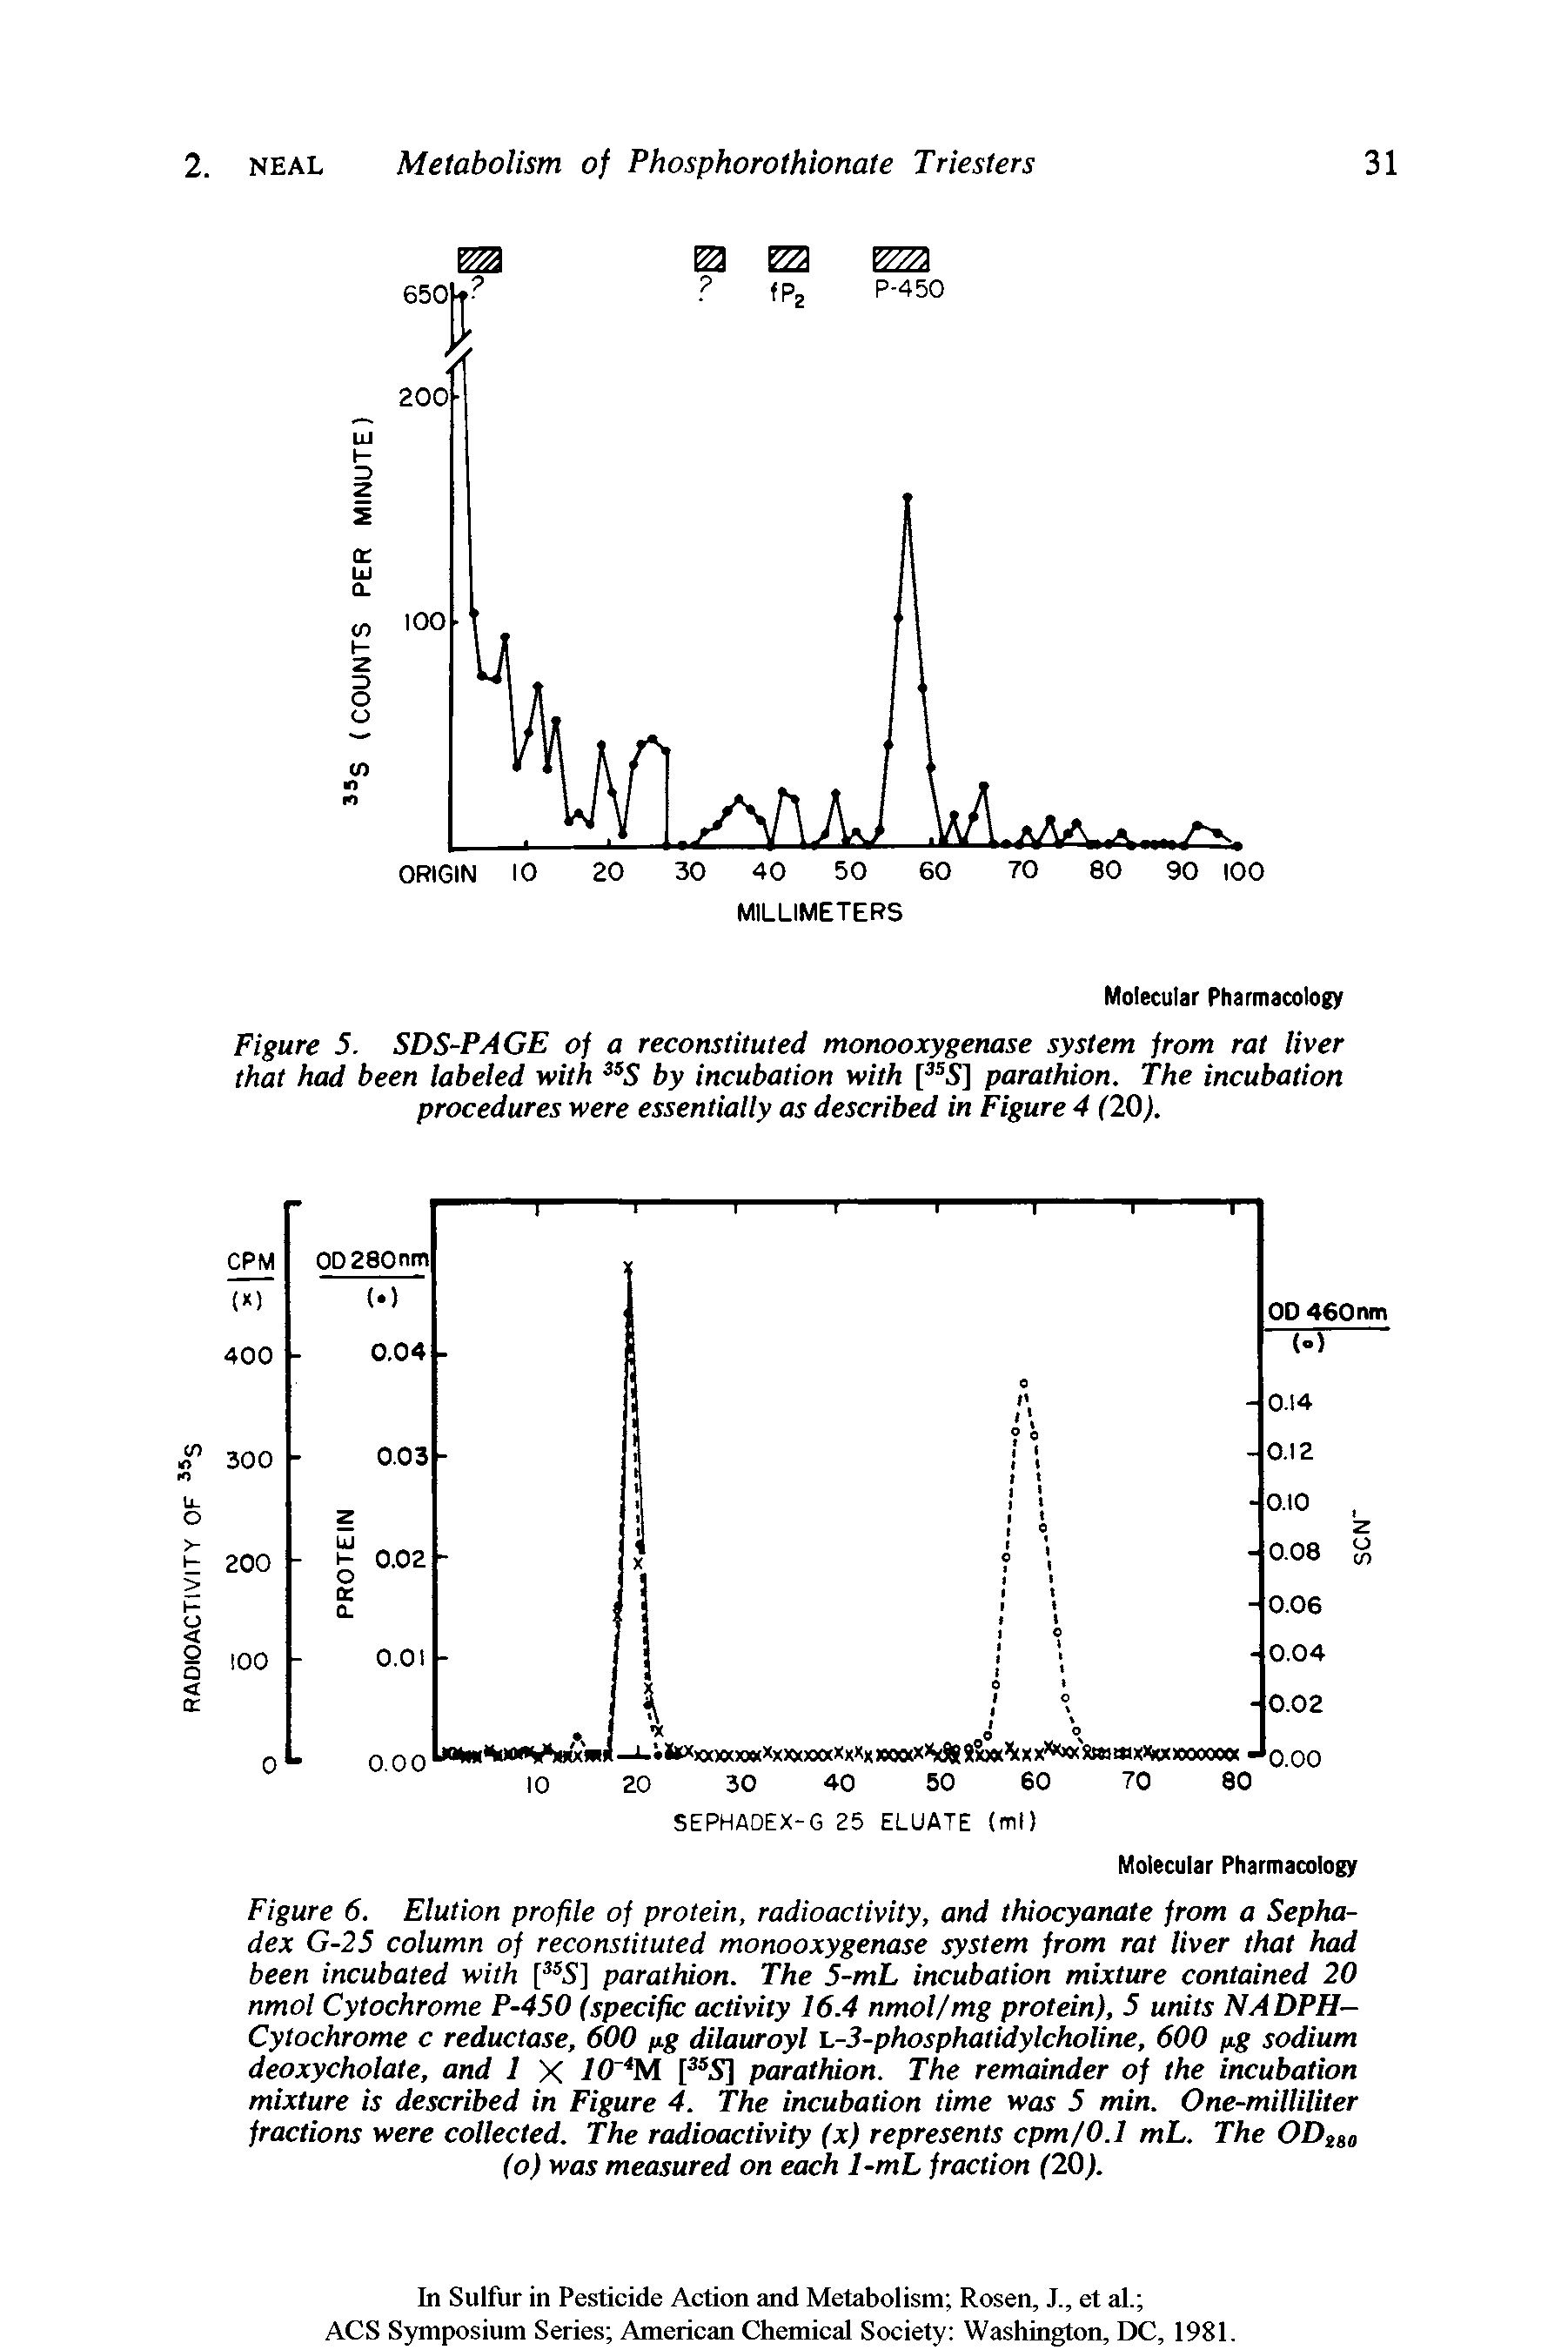 Figure 6. Elution profile of protein, radioactivity, and thiocyanate from a Sepha-dex G-25 column of reconstituted monooxygenase system from rat liver that had been incubated with [ 5] parathion. The 5-mL incubation mixture contained 20 nmol Cytochrome P-450 (specific activity 16.4 nmol/mg protein), 5 units NADPH-Cytochrome c reductase, 600 fig dilauroyl L-3-phosphatidylchoUne, 600 fig sodium deoxycholate, and 1 X IO M p 5] parathion. The remainder of the incubation mixture is described in Figure 4. The incubation time was 5 min. One-milliliter fractions were collected. The radioactivity (x) represents cpm/0.1 mL. The OOggo (o) was measured on each 1-mL fraction (20).